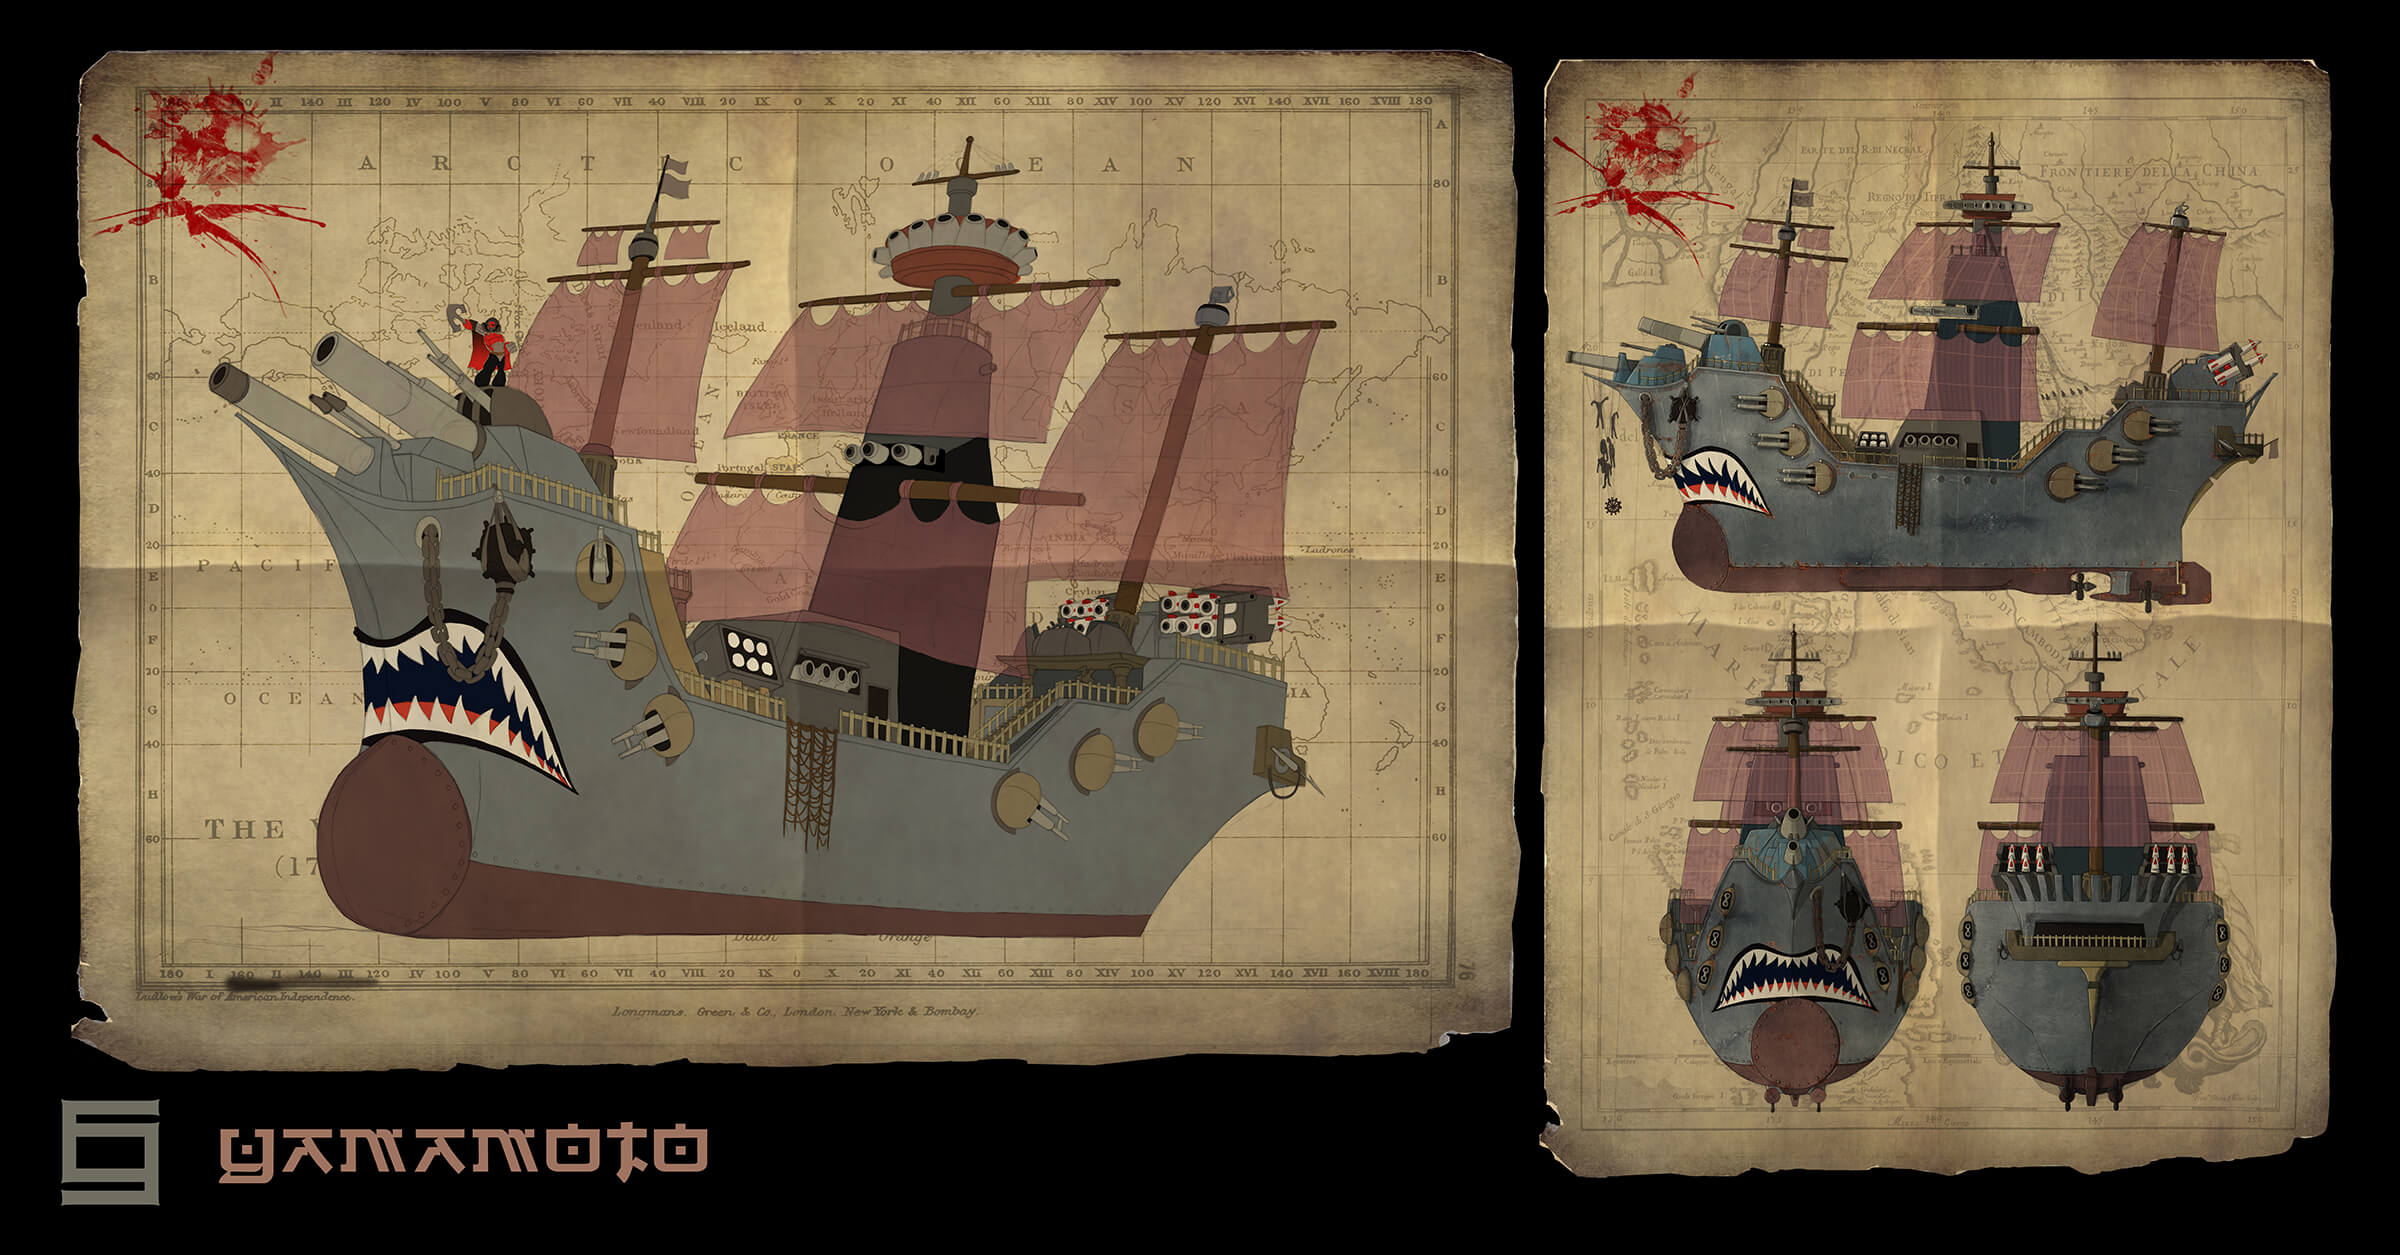 Concept art turnaround of a stylized battleship wielding modern guns and armor, with sails and hull of an older-style vessel.